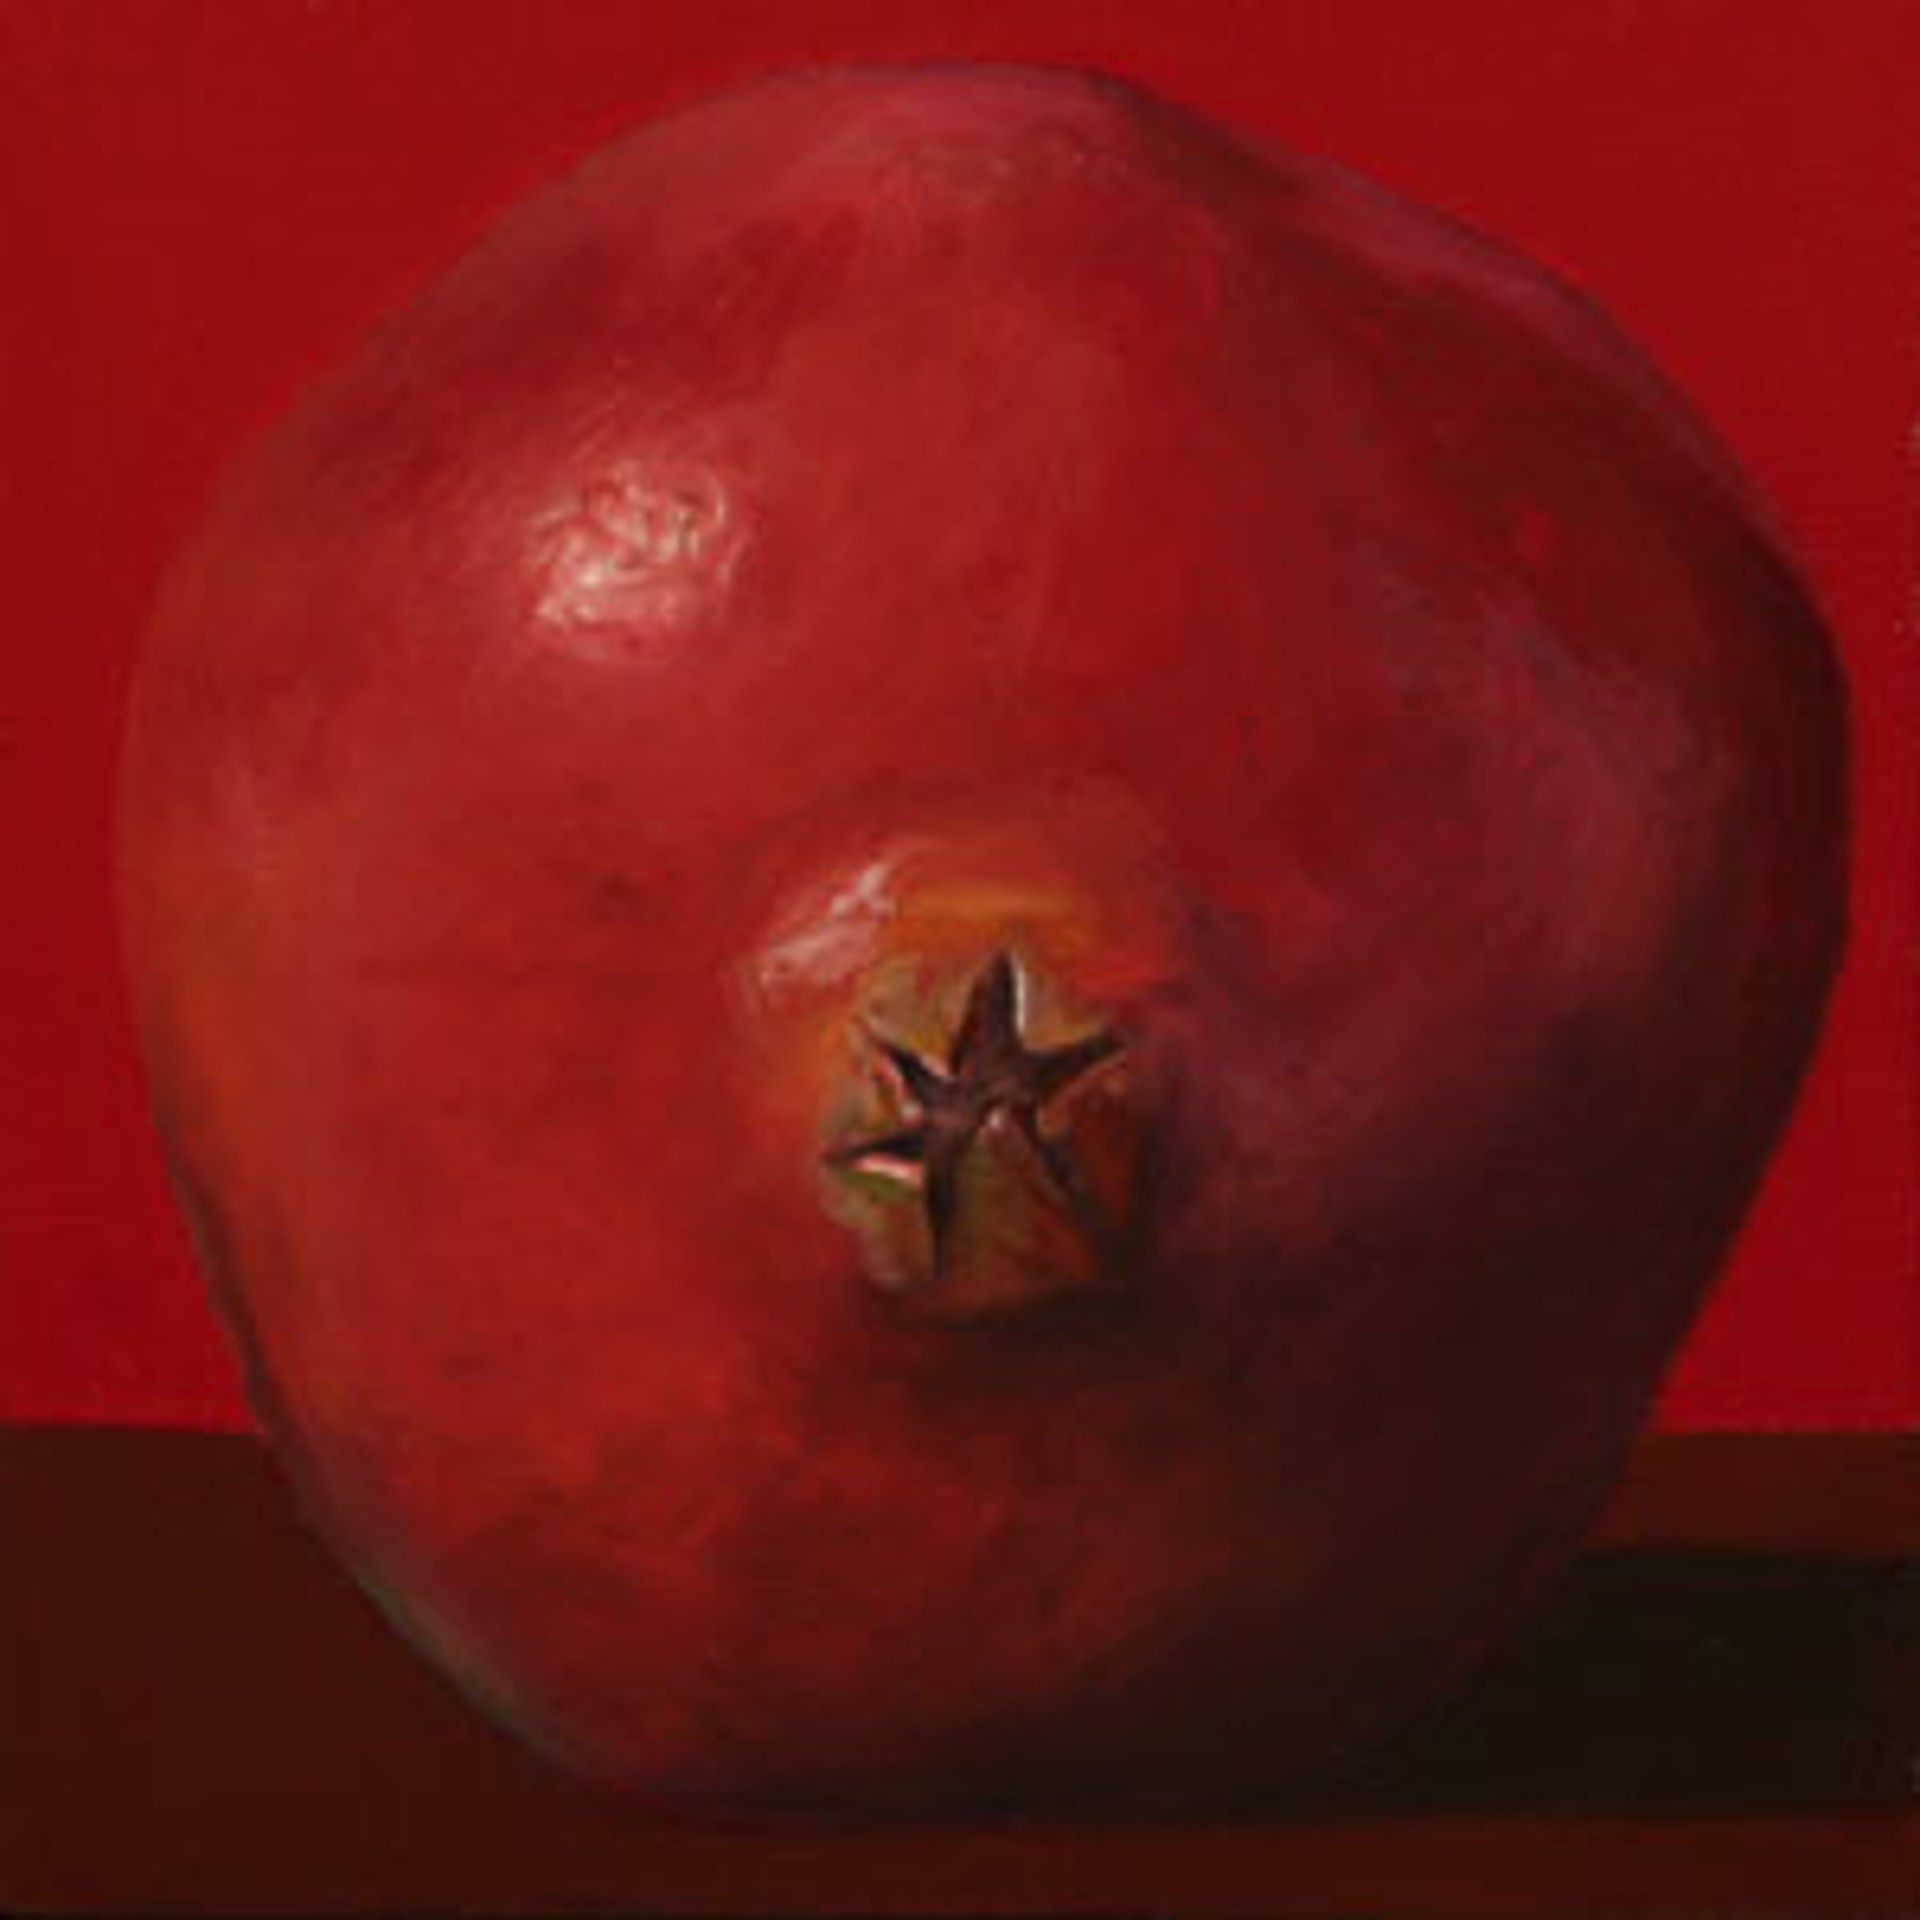 Pomegranate Side on Red by Bill Chisholm